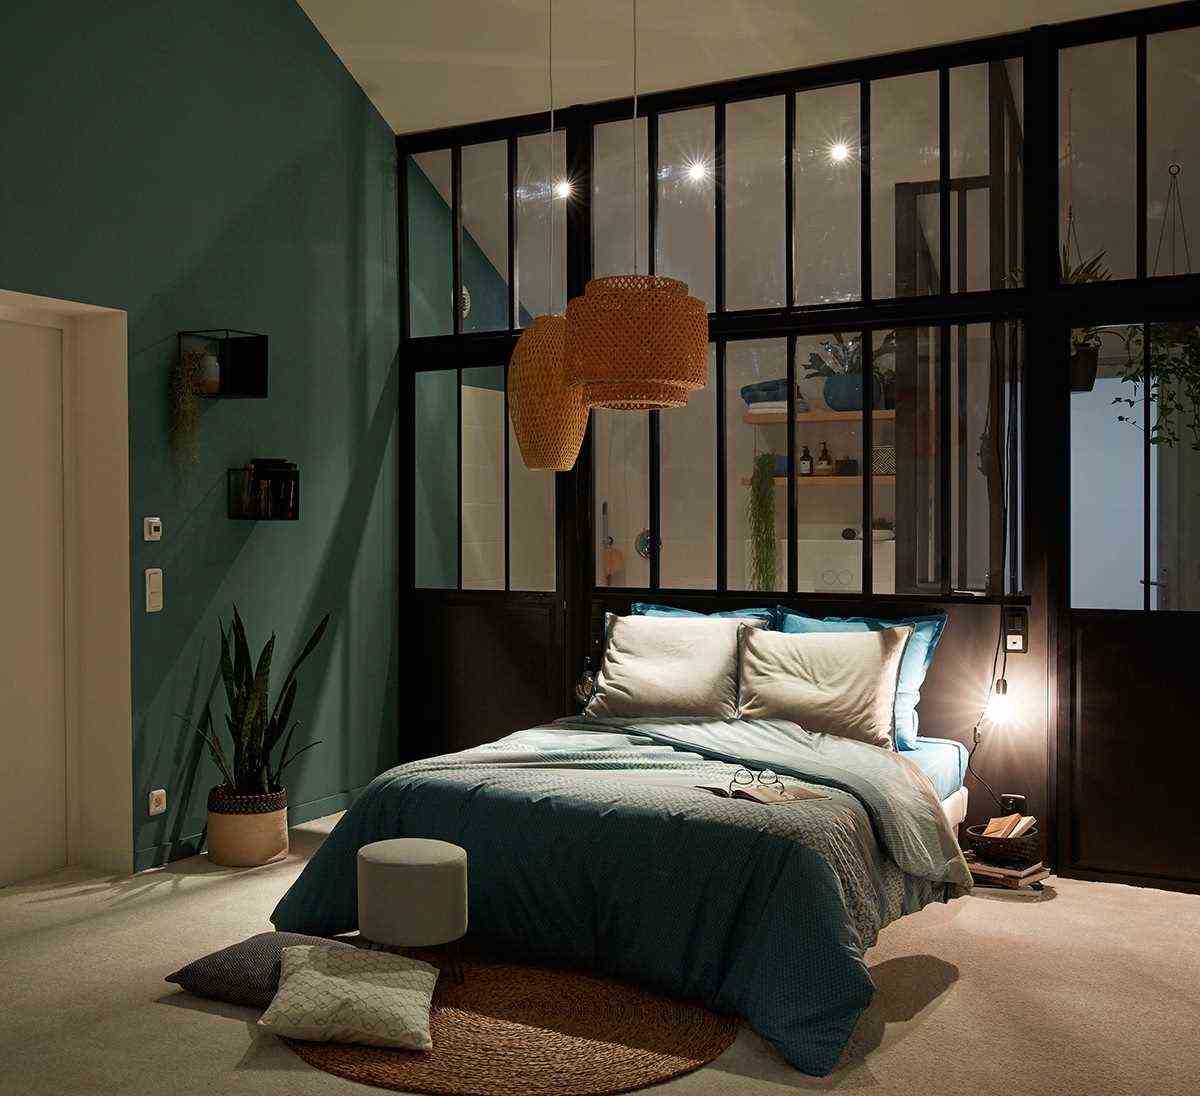 Bedroom With Canopy And Artificial Lighting Works 